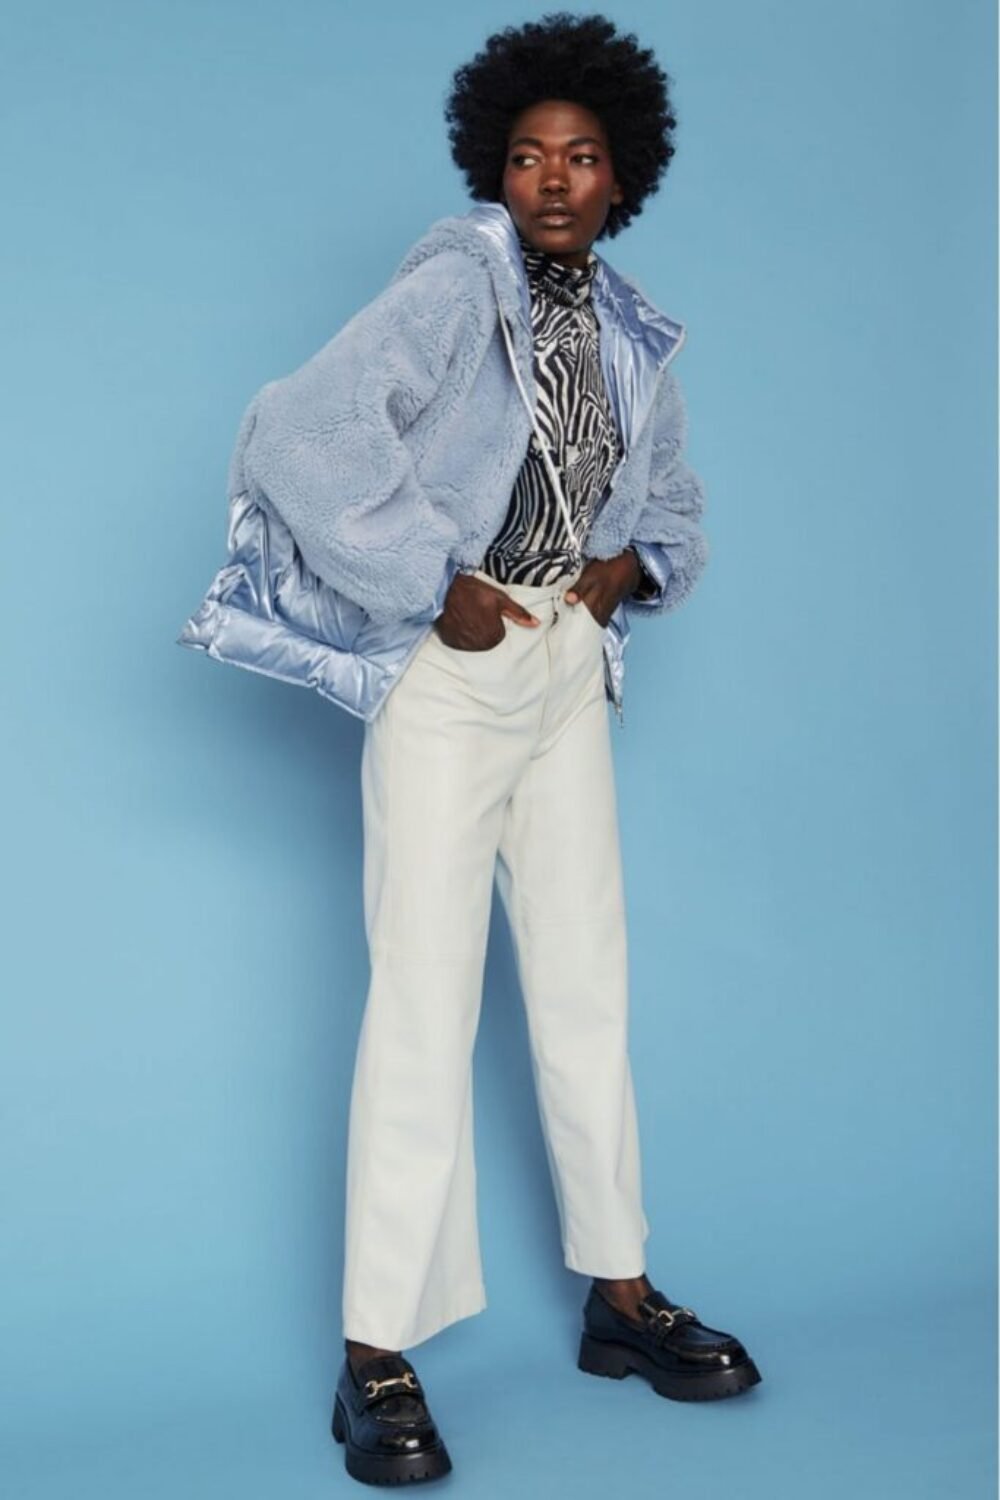 Shop Lux Blue Faux Fur Bomber Jacket and women's luxury and designer clothes at www.lux-apparel.co.uk